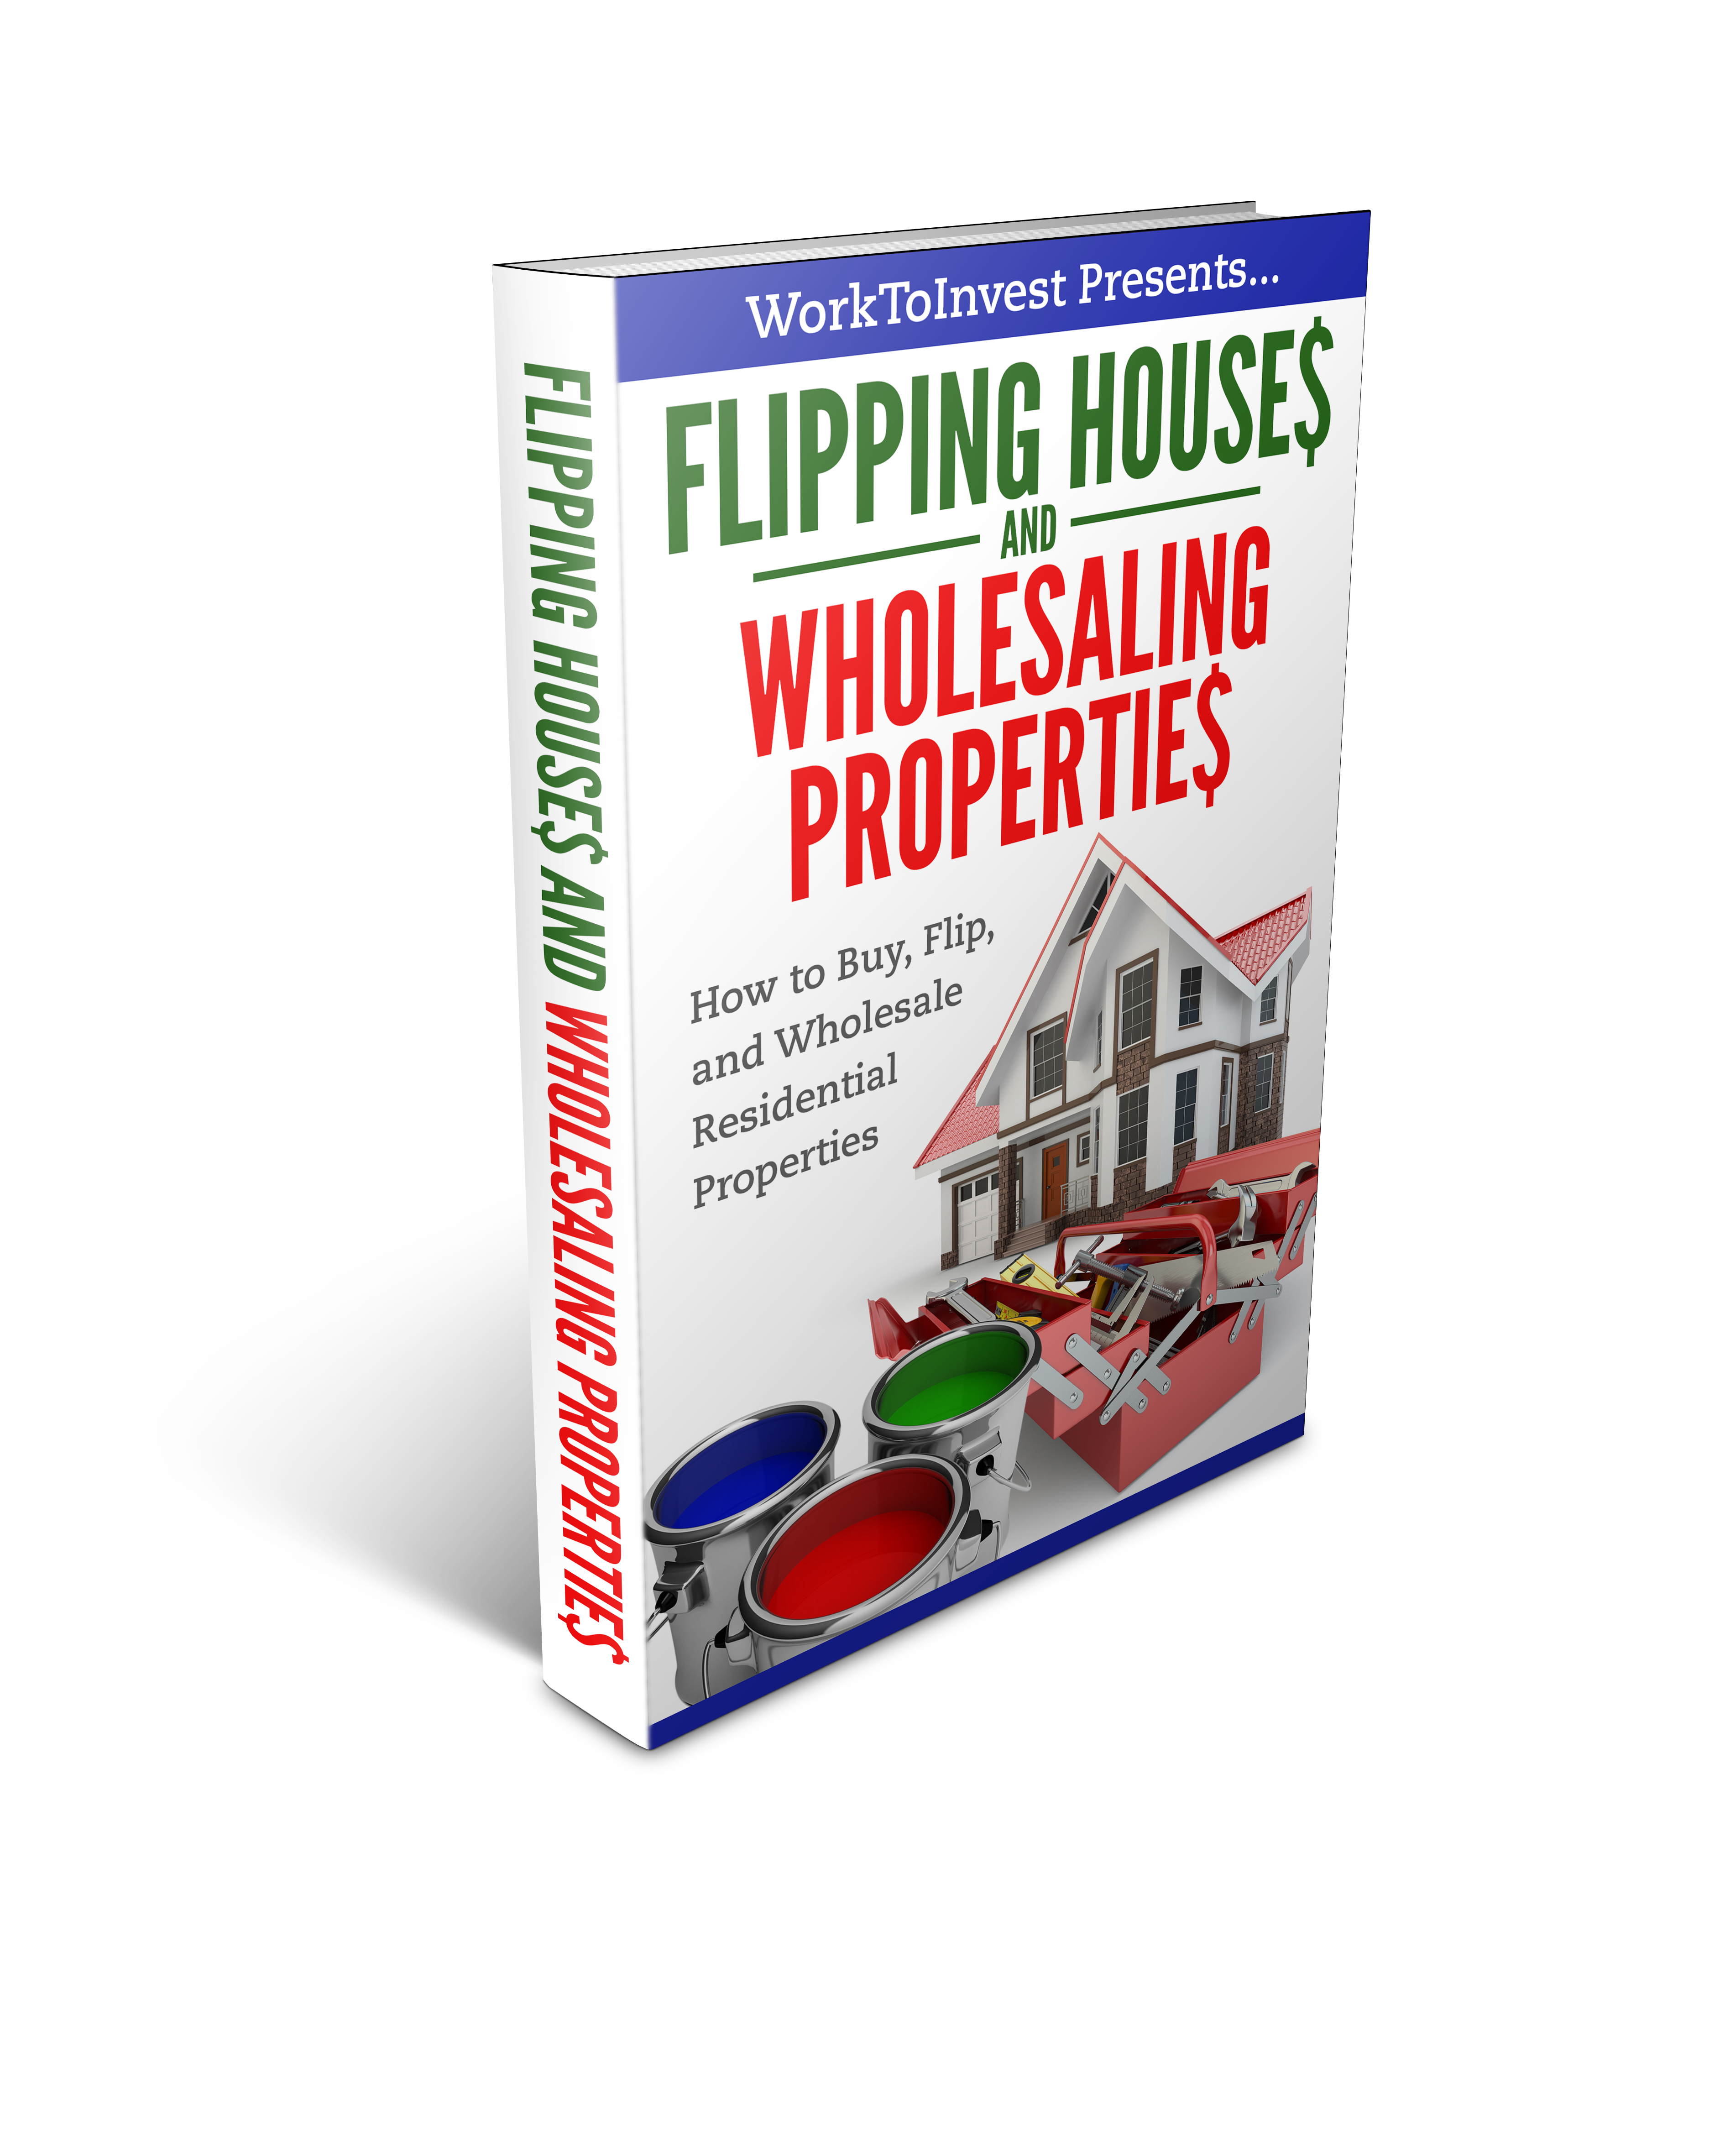 How to Flip Houses and how to wholesale properties